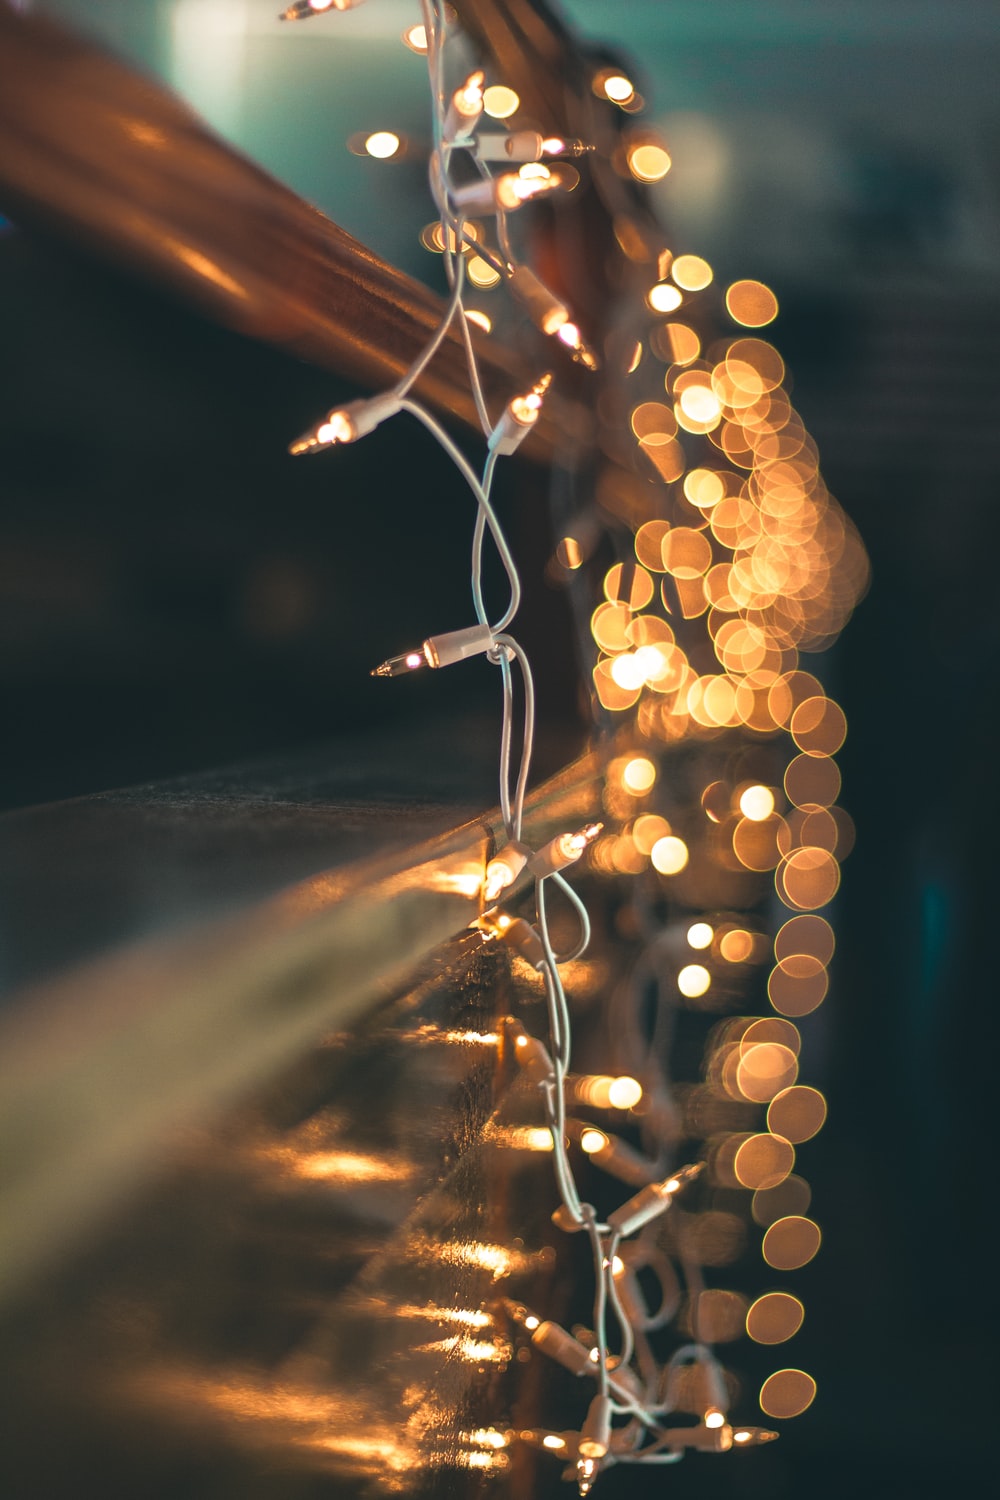 Christmas Light Picture. Download Free Image